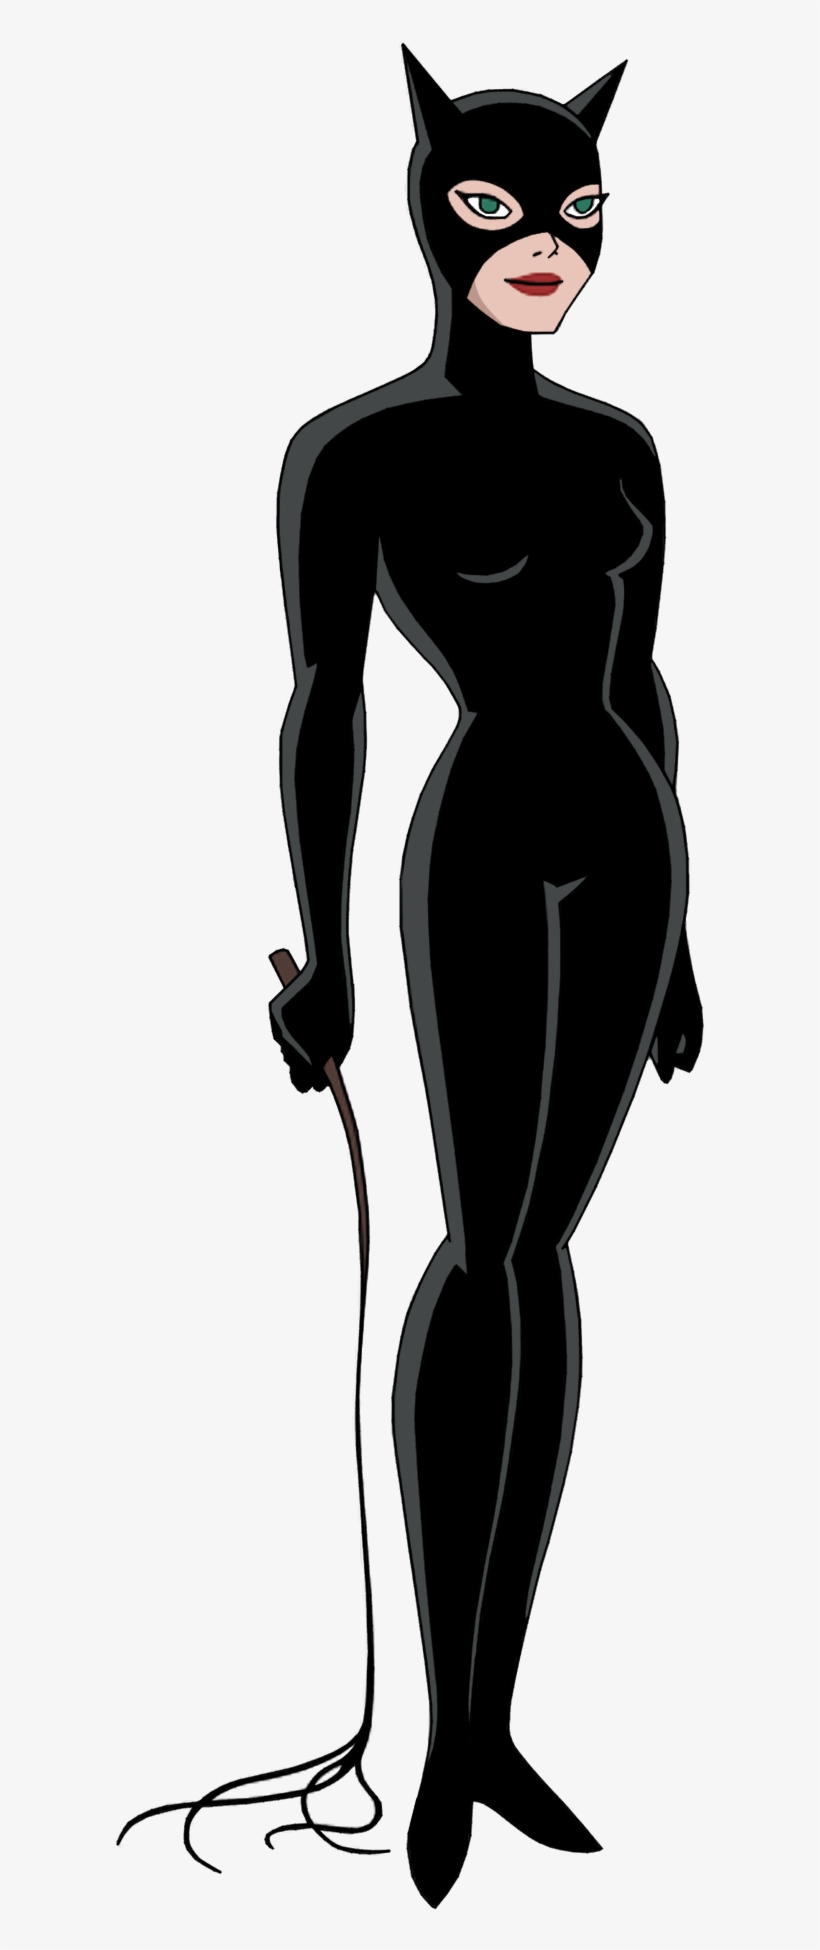 Catwoman By Therealfb1 - Deviantart Batman Returns Catwoman, transparent png #732607